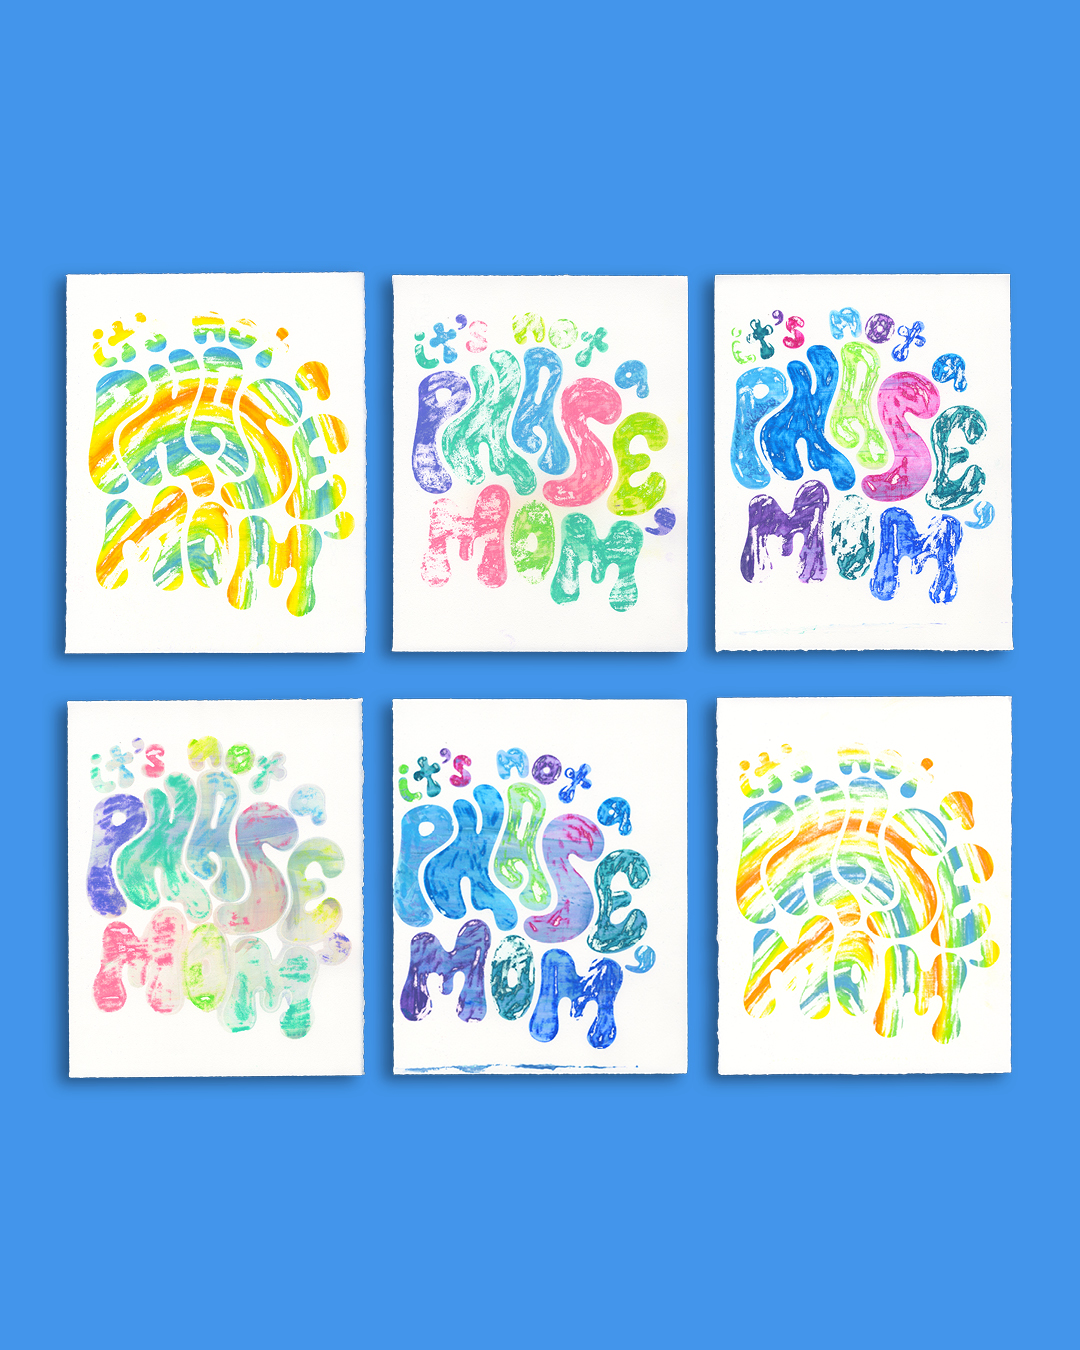 6 monoprints arranged on a bright blue background. Each print is in various bright colors that read 'it's not a phase, mom' in bubbly letters, but the type is distorted and not very legible in some of them. They are messy, and the colors bleed into one another.